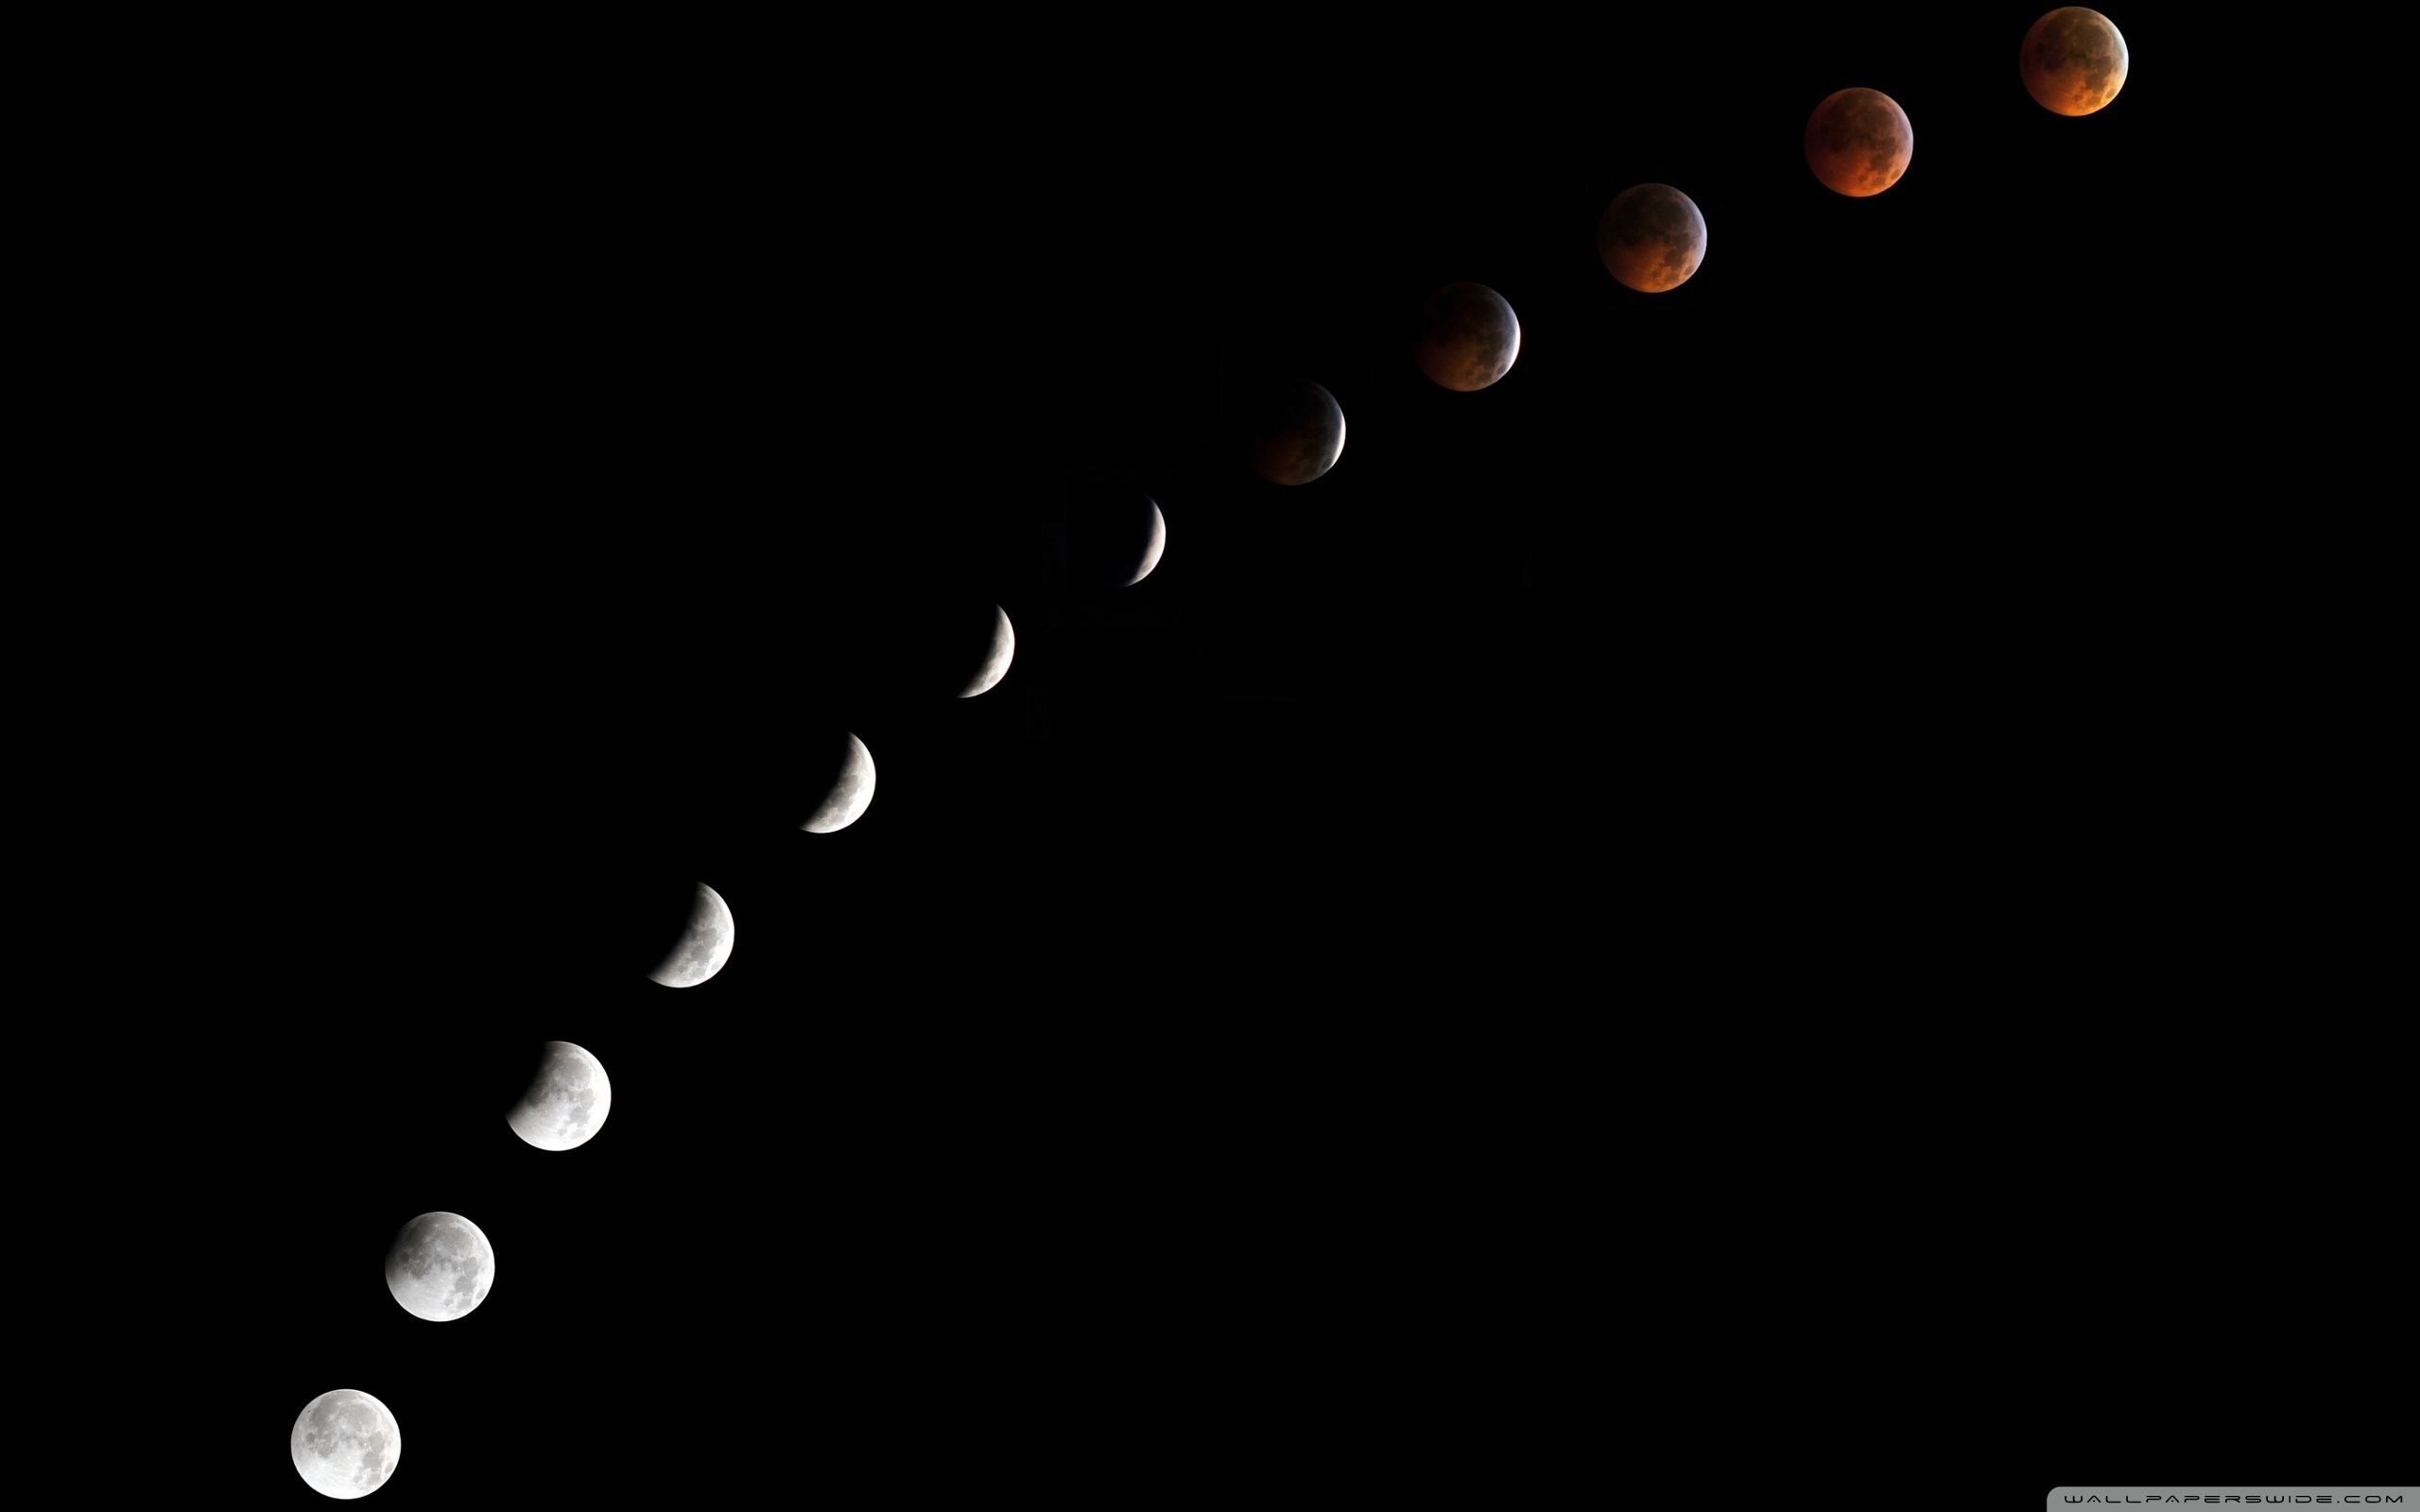 The moon is in different phases of its eclipse - Moon phases